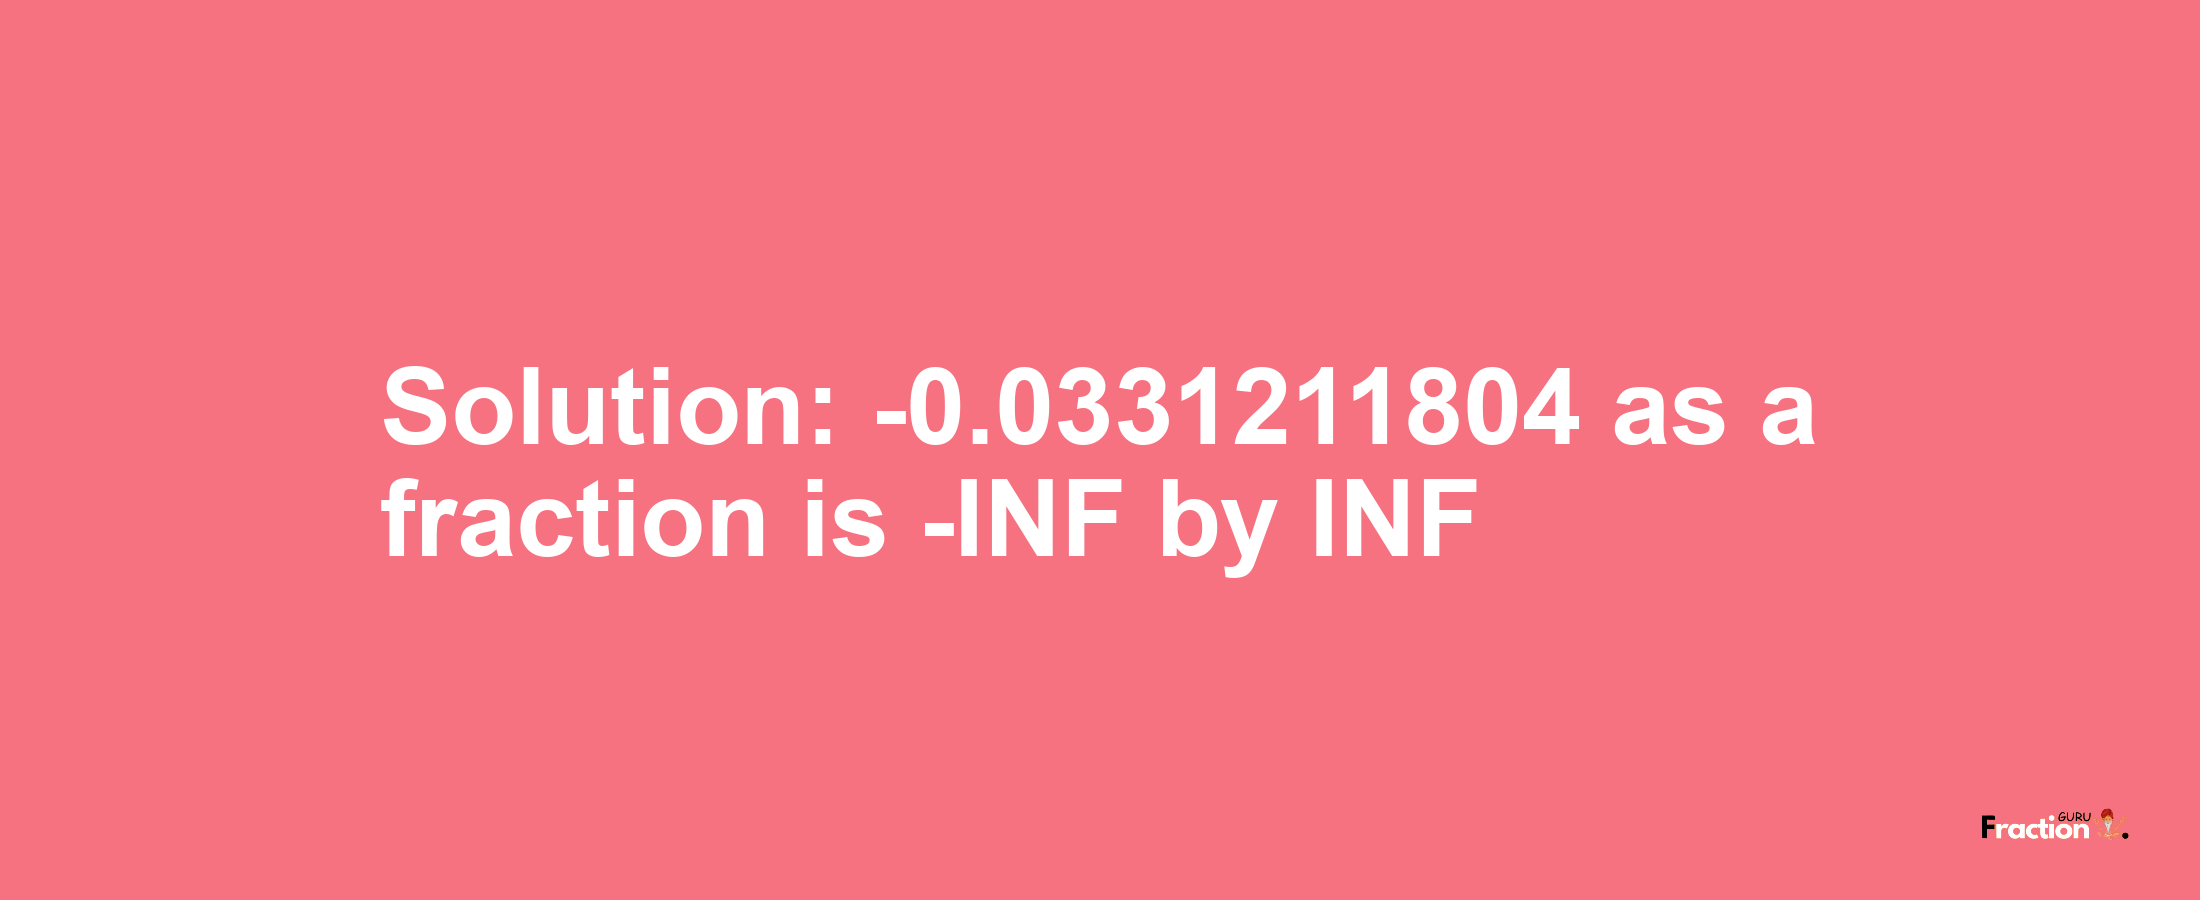 Solution:-0.0331211804 as a fraction is -INF/INF